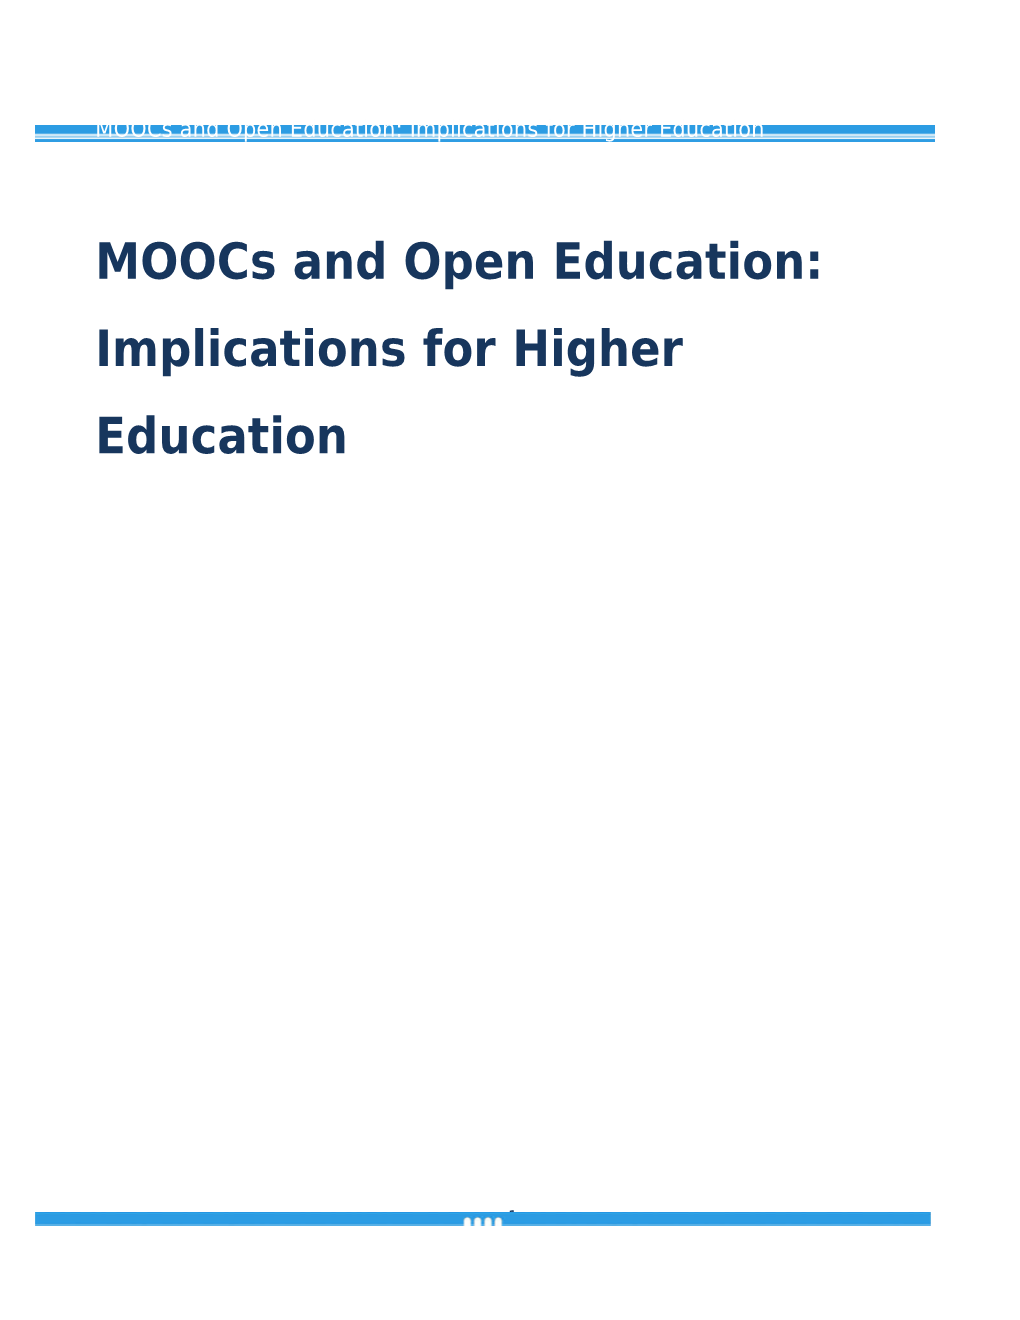 Moocs and Open Education: Implications for Higher Education